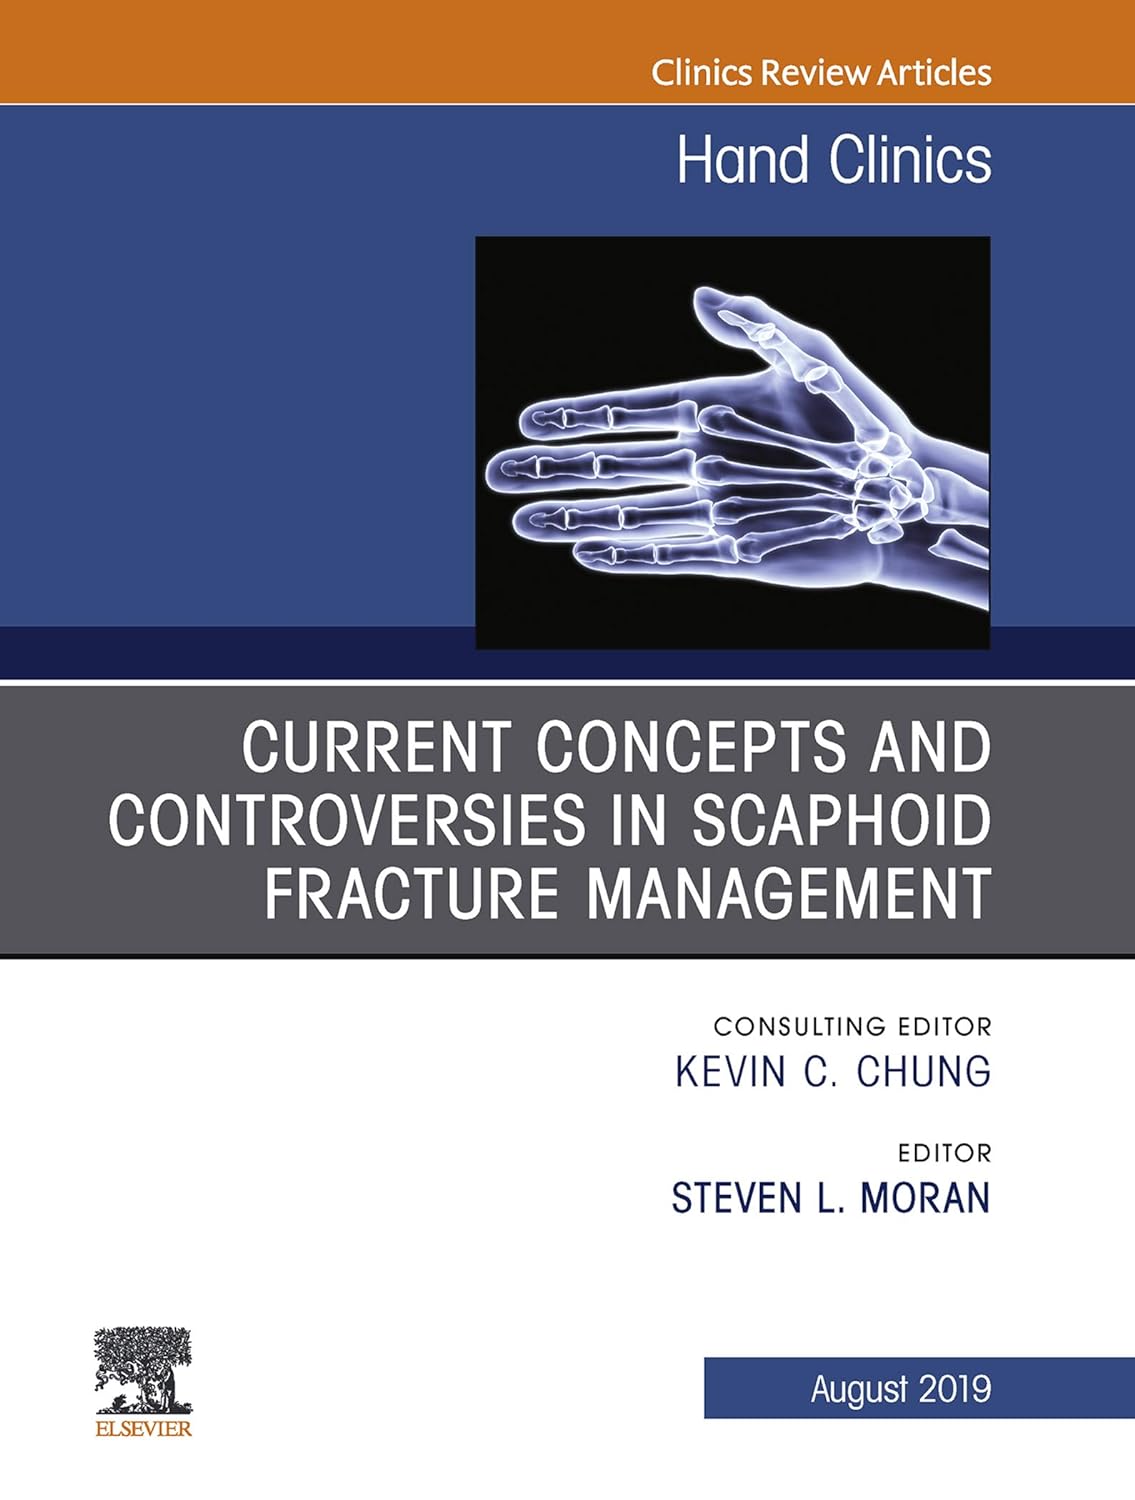 Current Concepts and Controversies in Scaphoid Fracture Management, An Issue of Hand Clinics (Volume 35-3) (The Clinics: Orthopedics, Volume 35-3)  by Steven L. Moran 